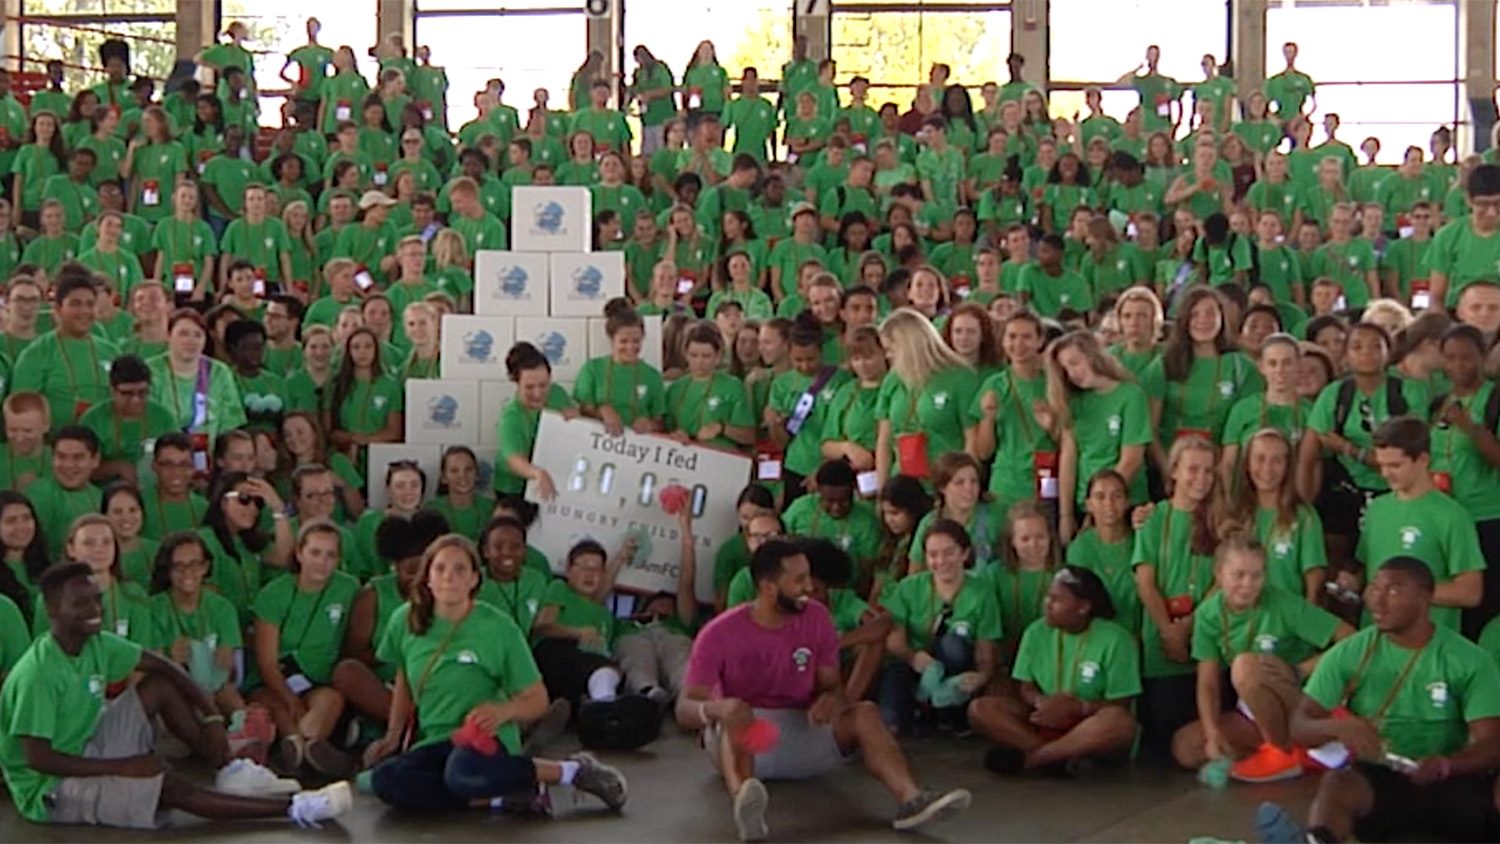 A large group of young people wearing green shirts and holding a large poster participating in the 2016 North Carolina State 4-H Congress